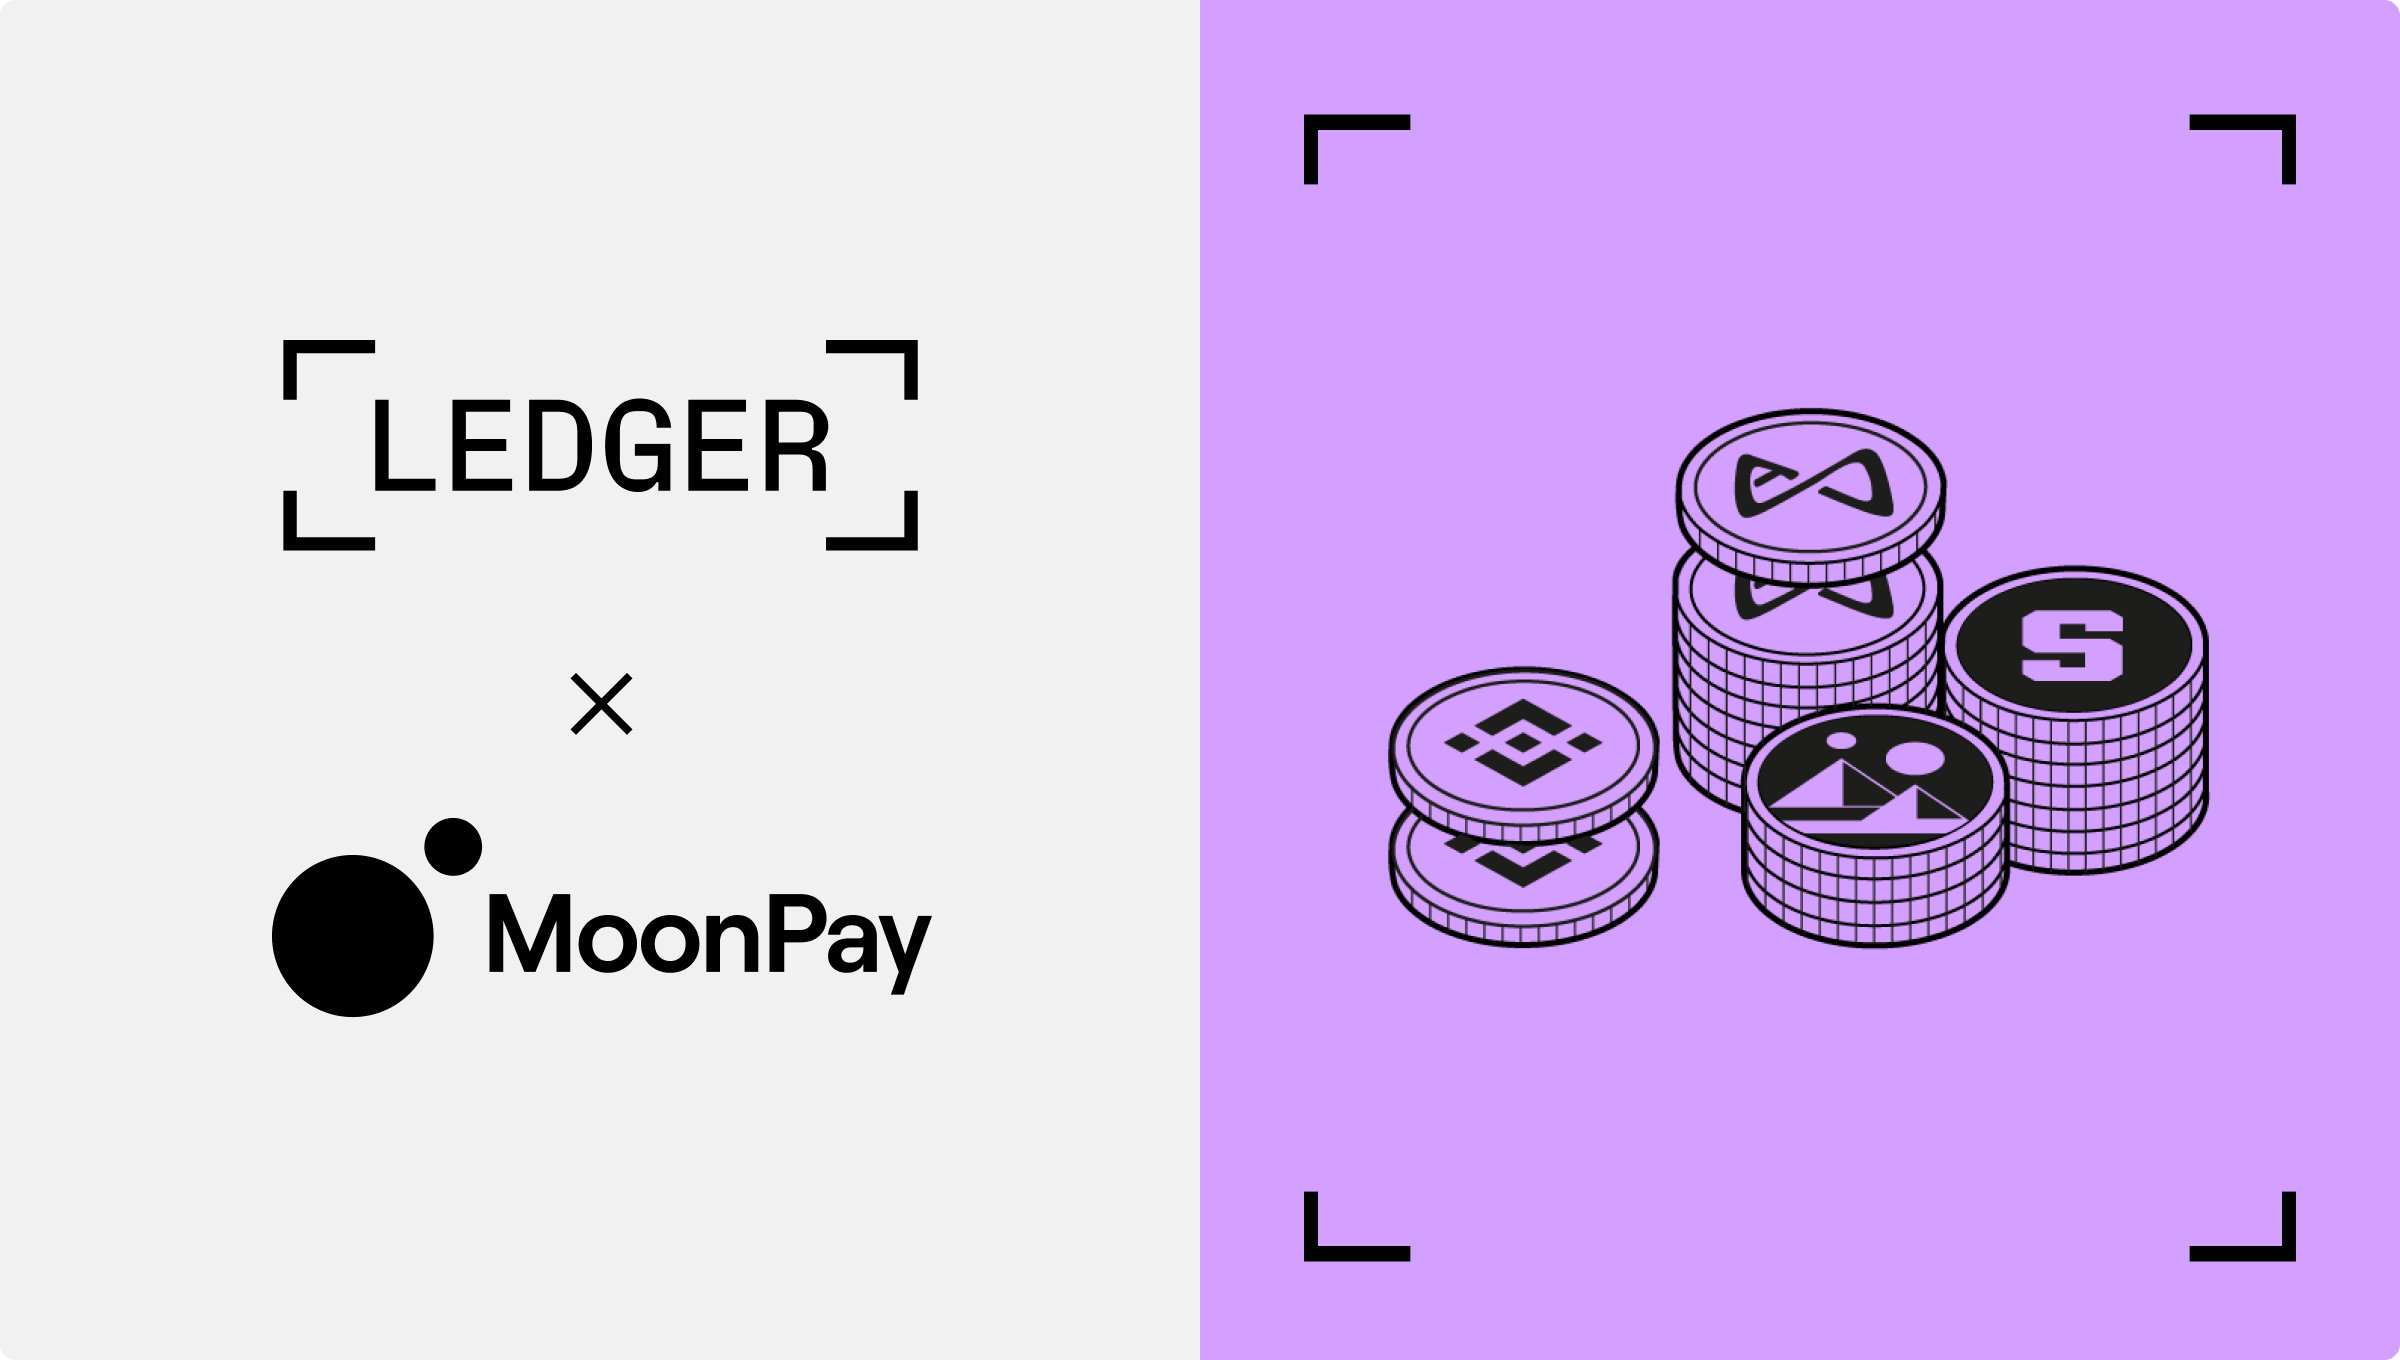 MoonPay is now available through Ledger for more coins and more countries